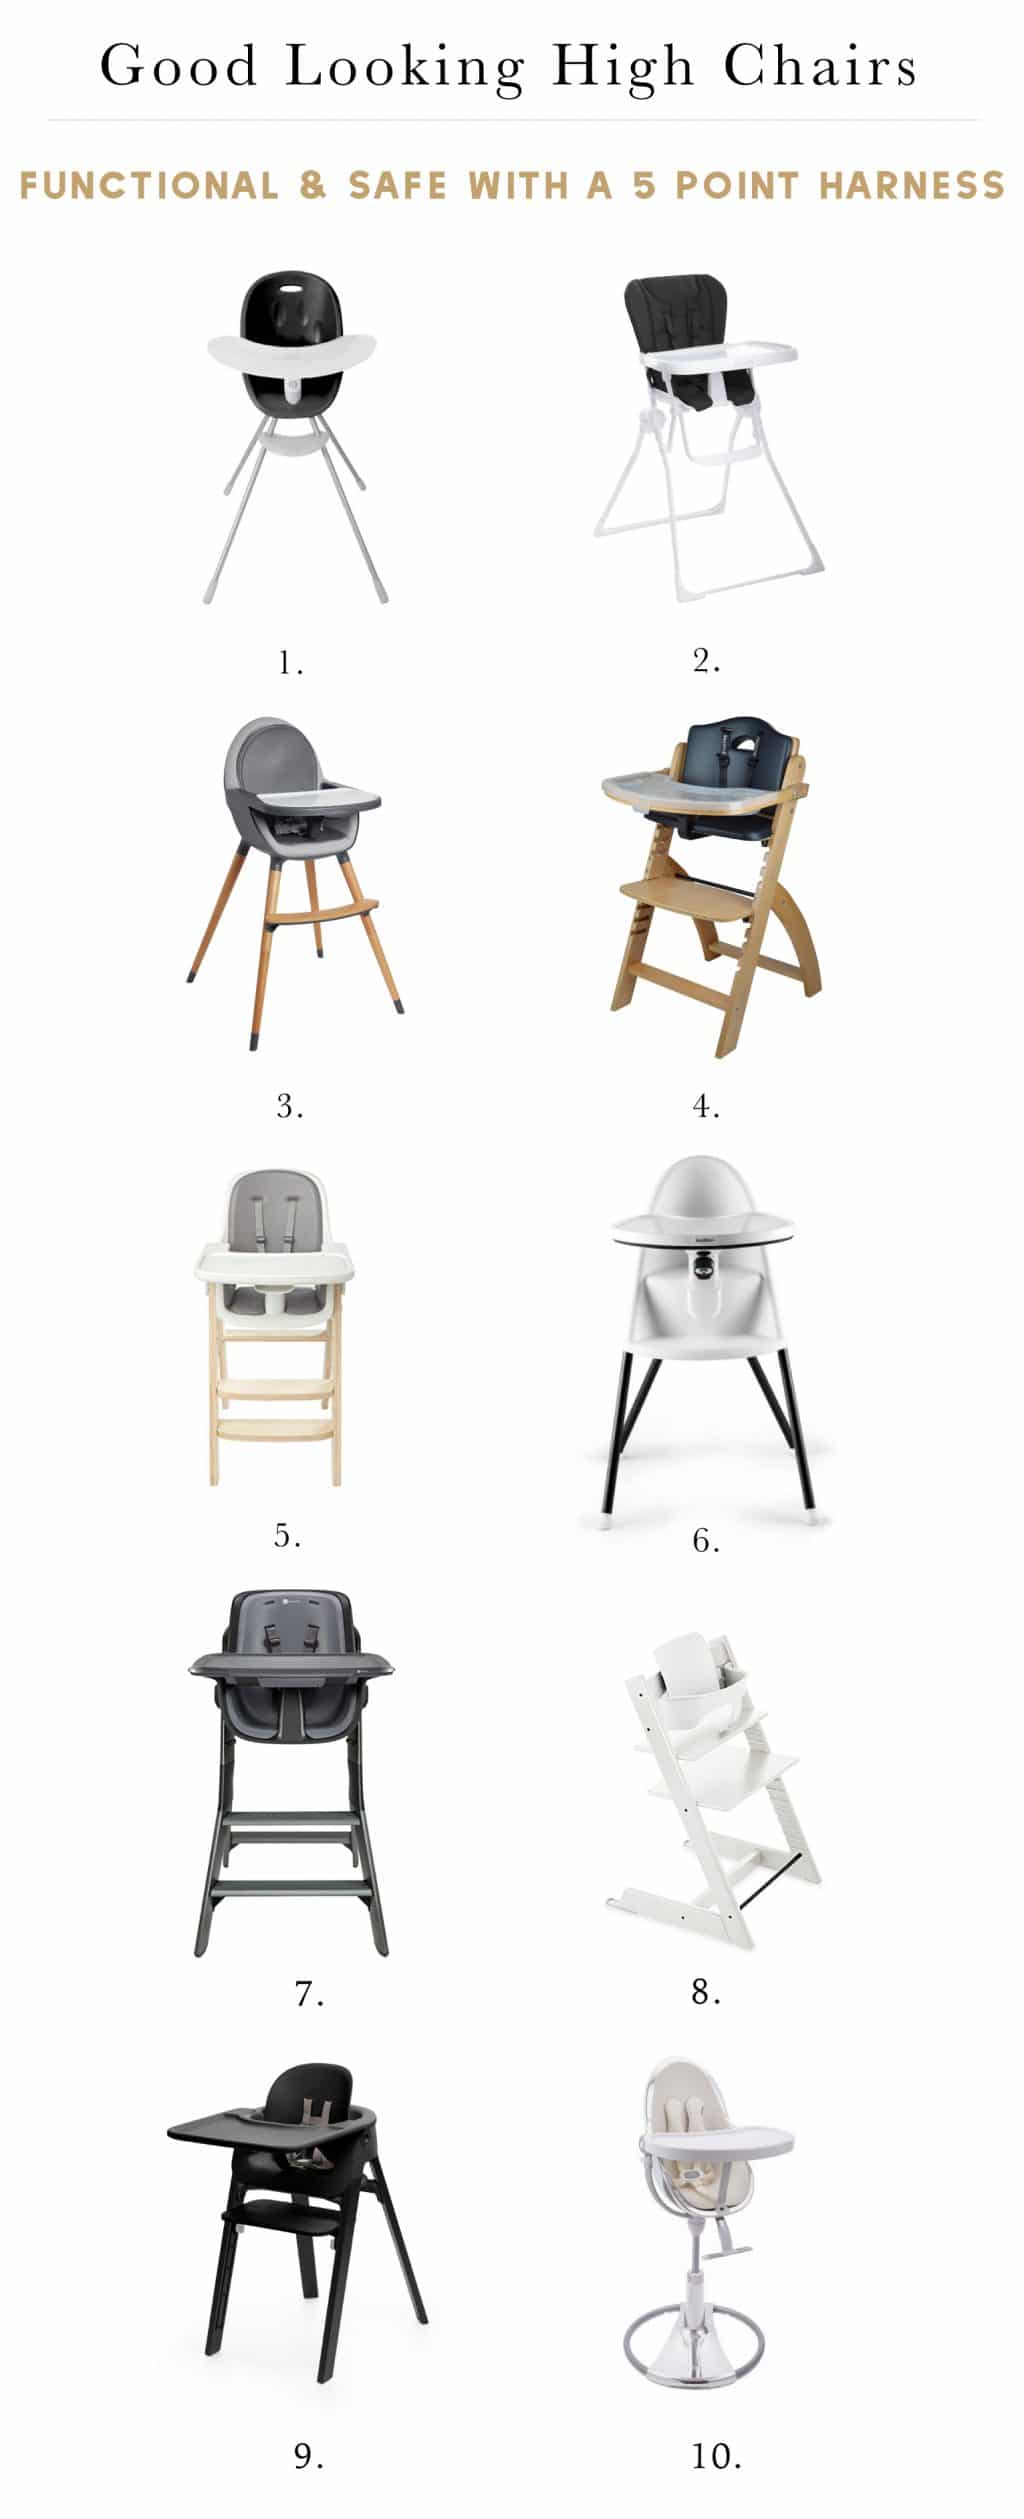 10 Really Good Looking High Chairs That Are Also Safe And